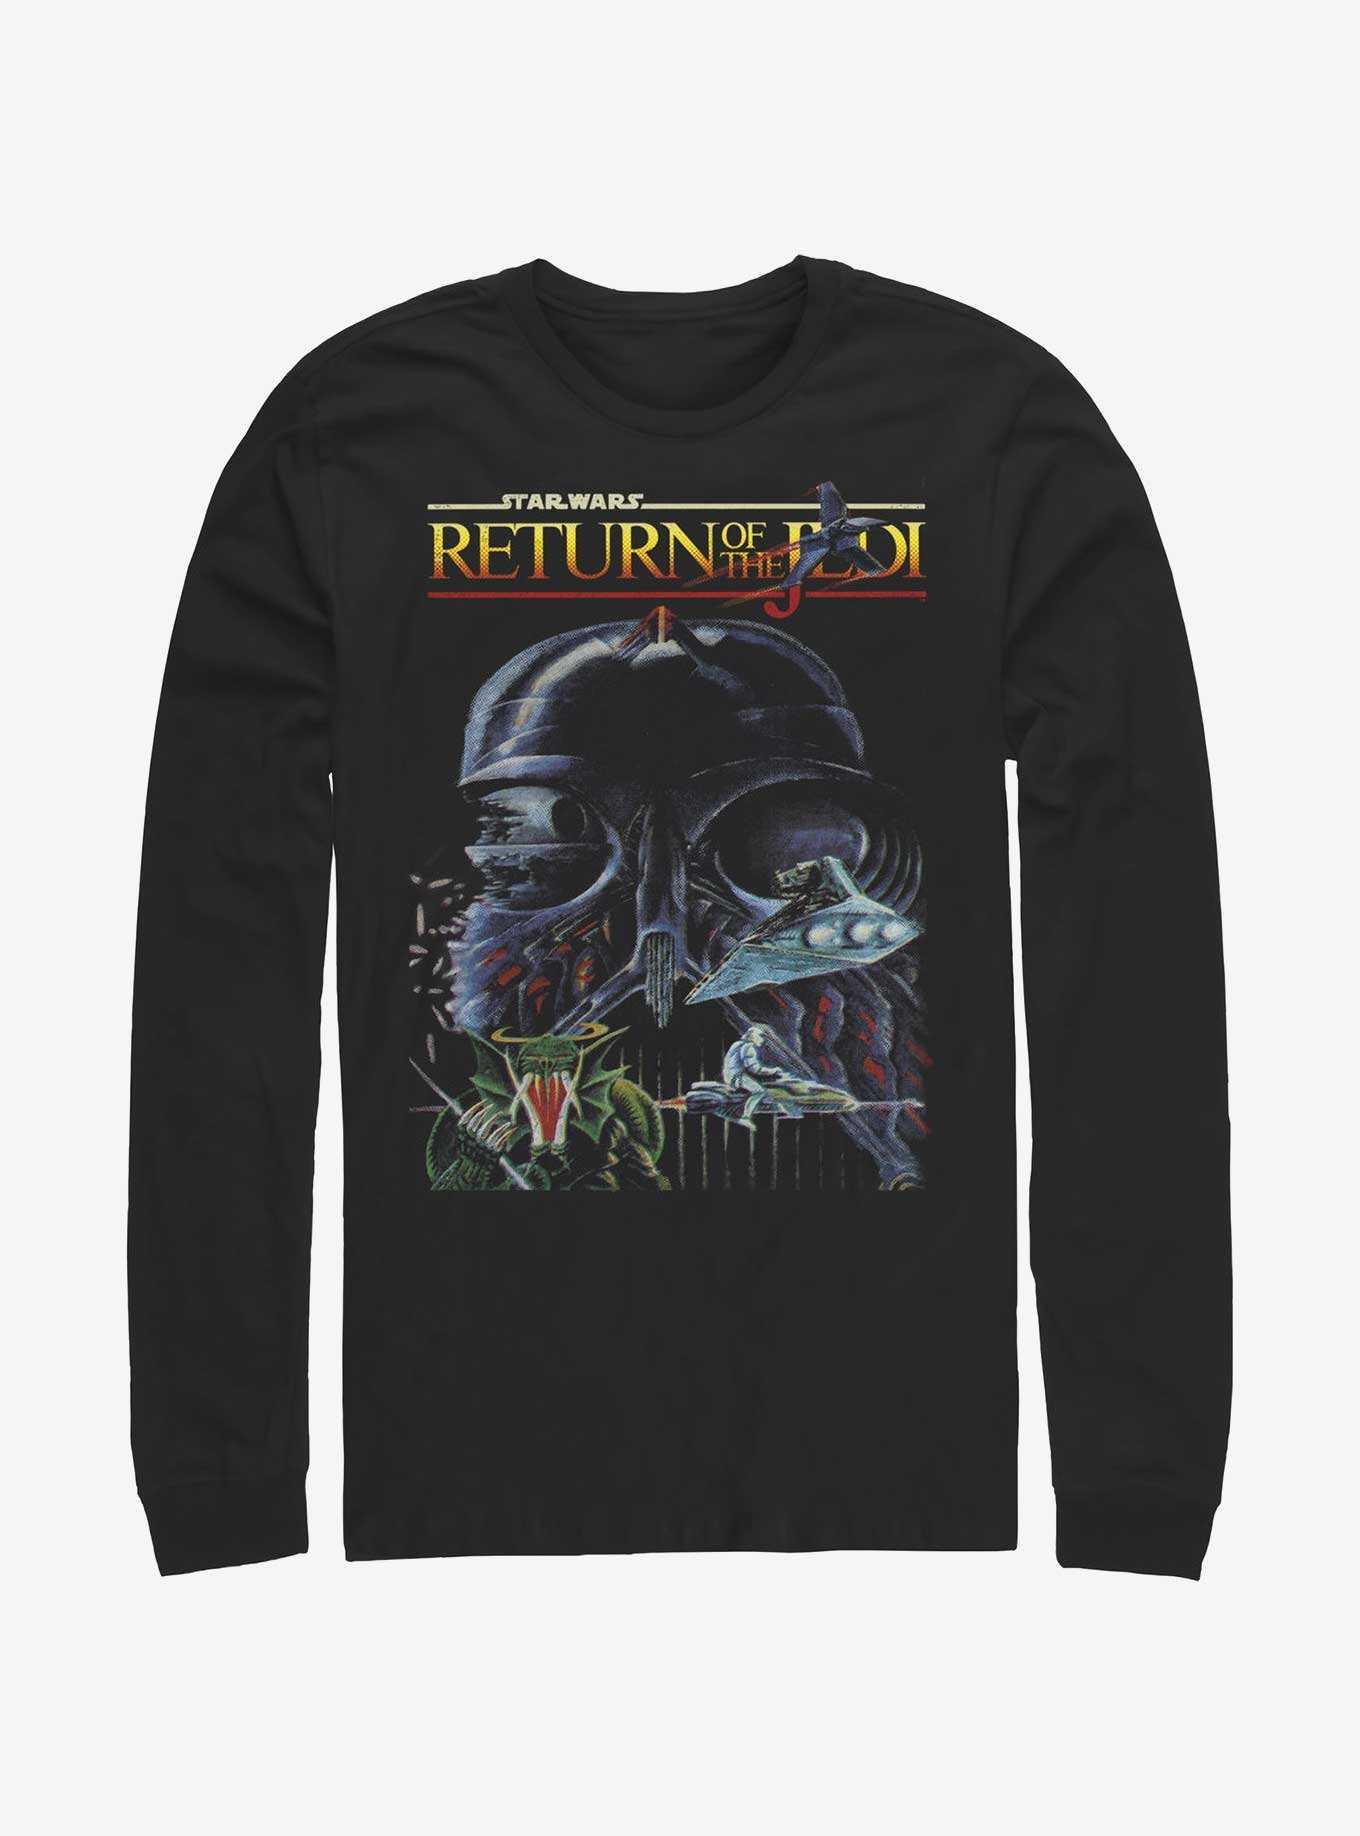 Star Wars Return of the Jedi 40th Anniversary Concept Cover Art Long-Sleeve T-Shirt, , hi-res